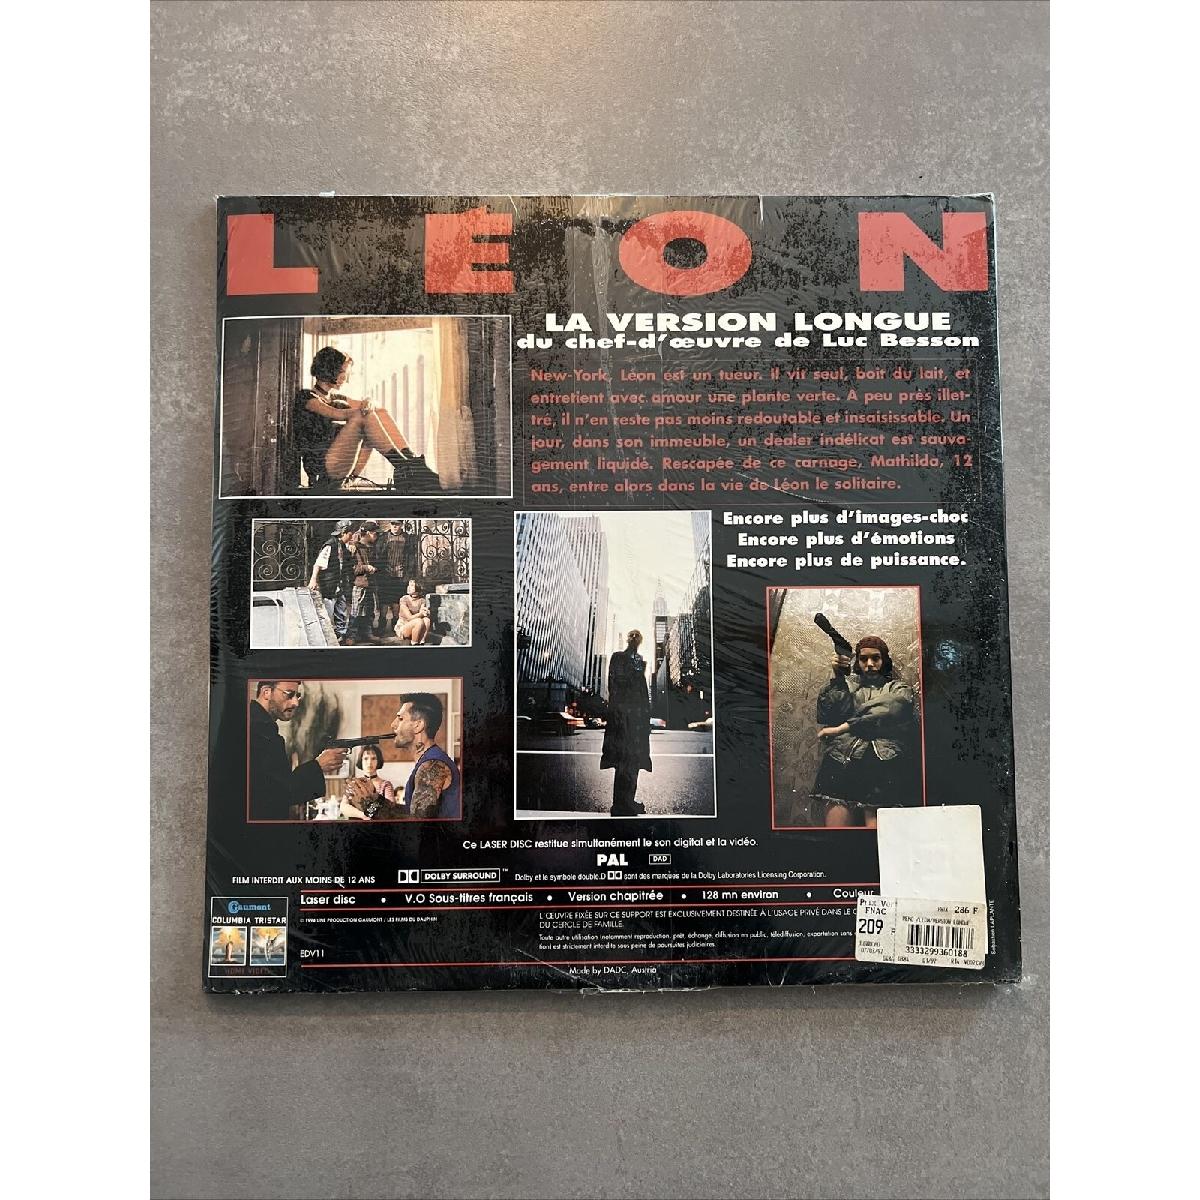 Leon Laser Disc - Picture 1 of 1